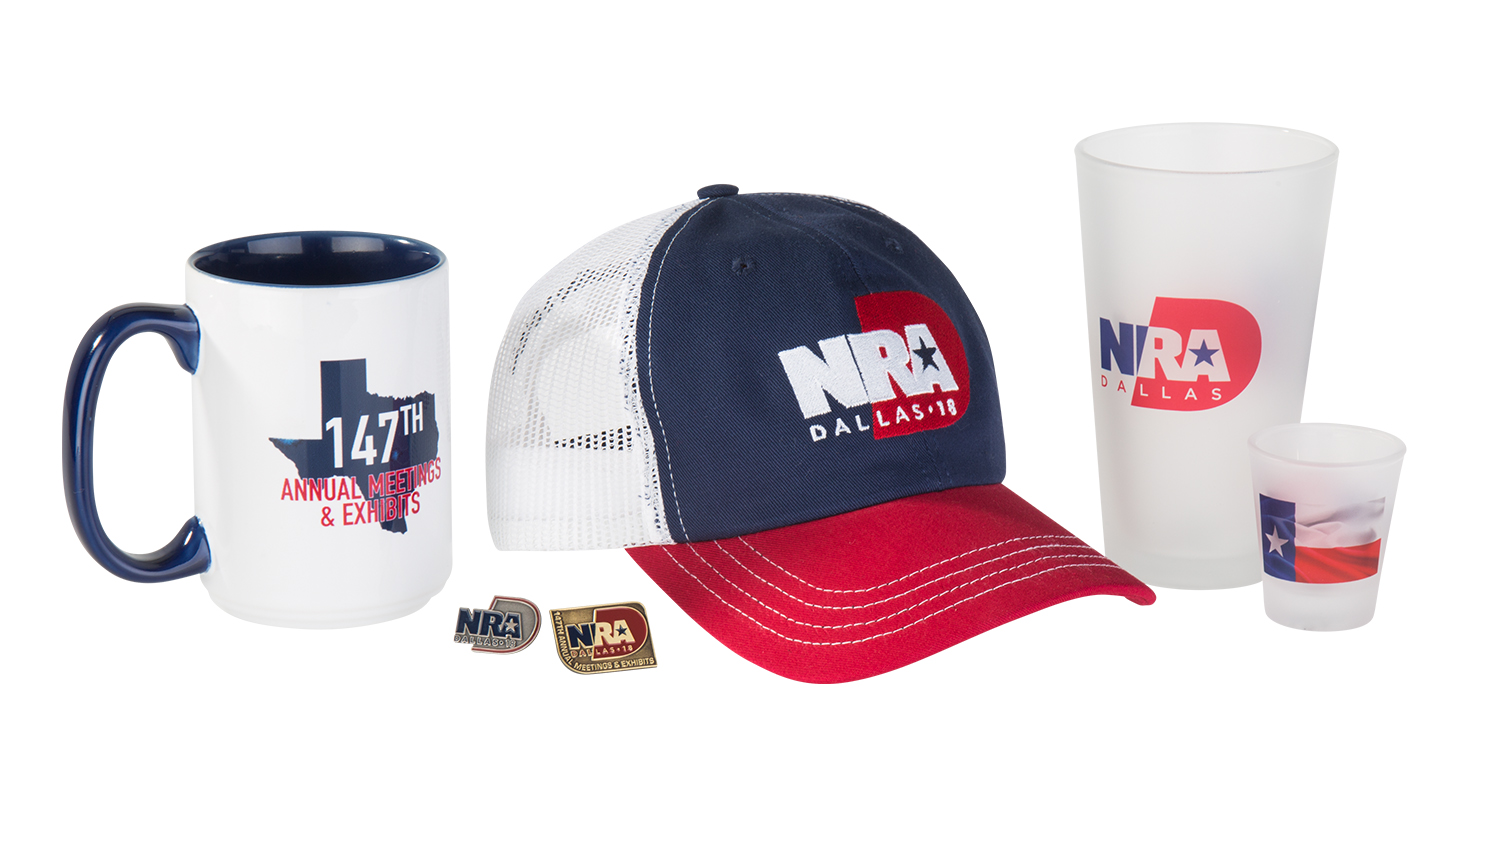 Get Your Exclusive 2018 NRA Annual Meetings Gear from the NRAstore